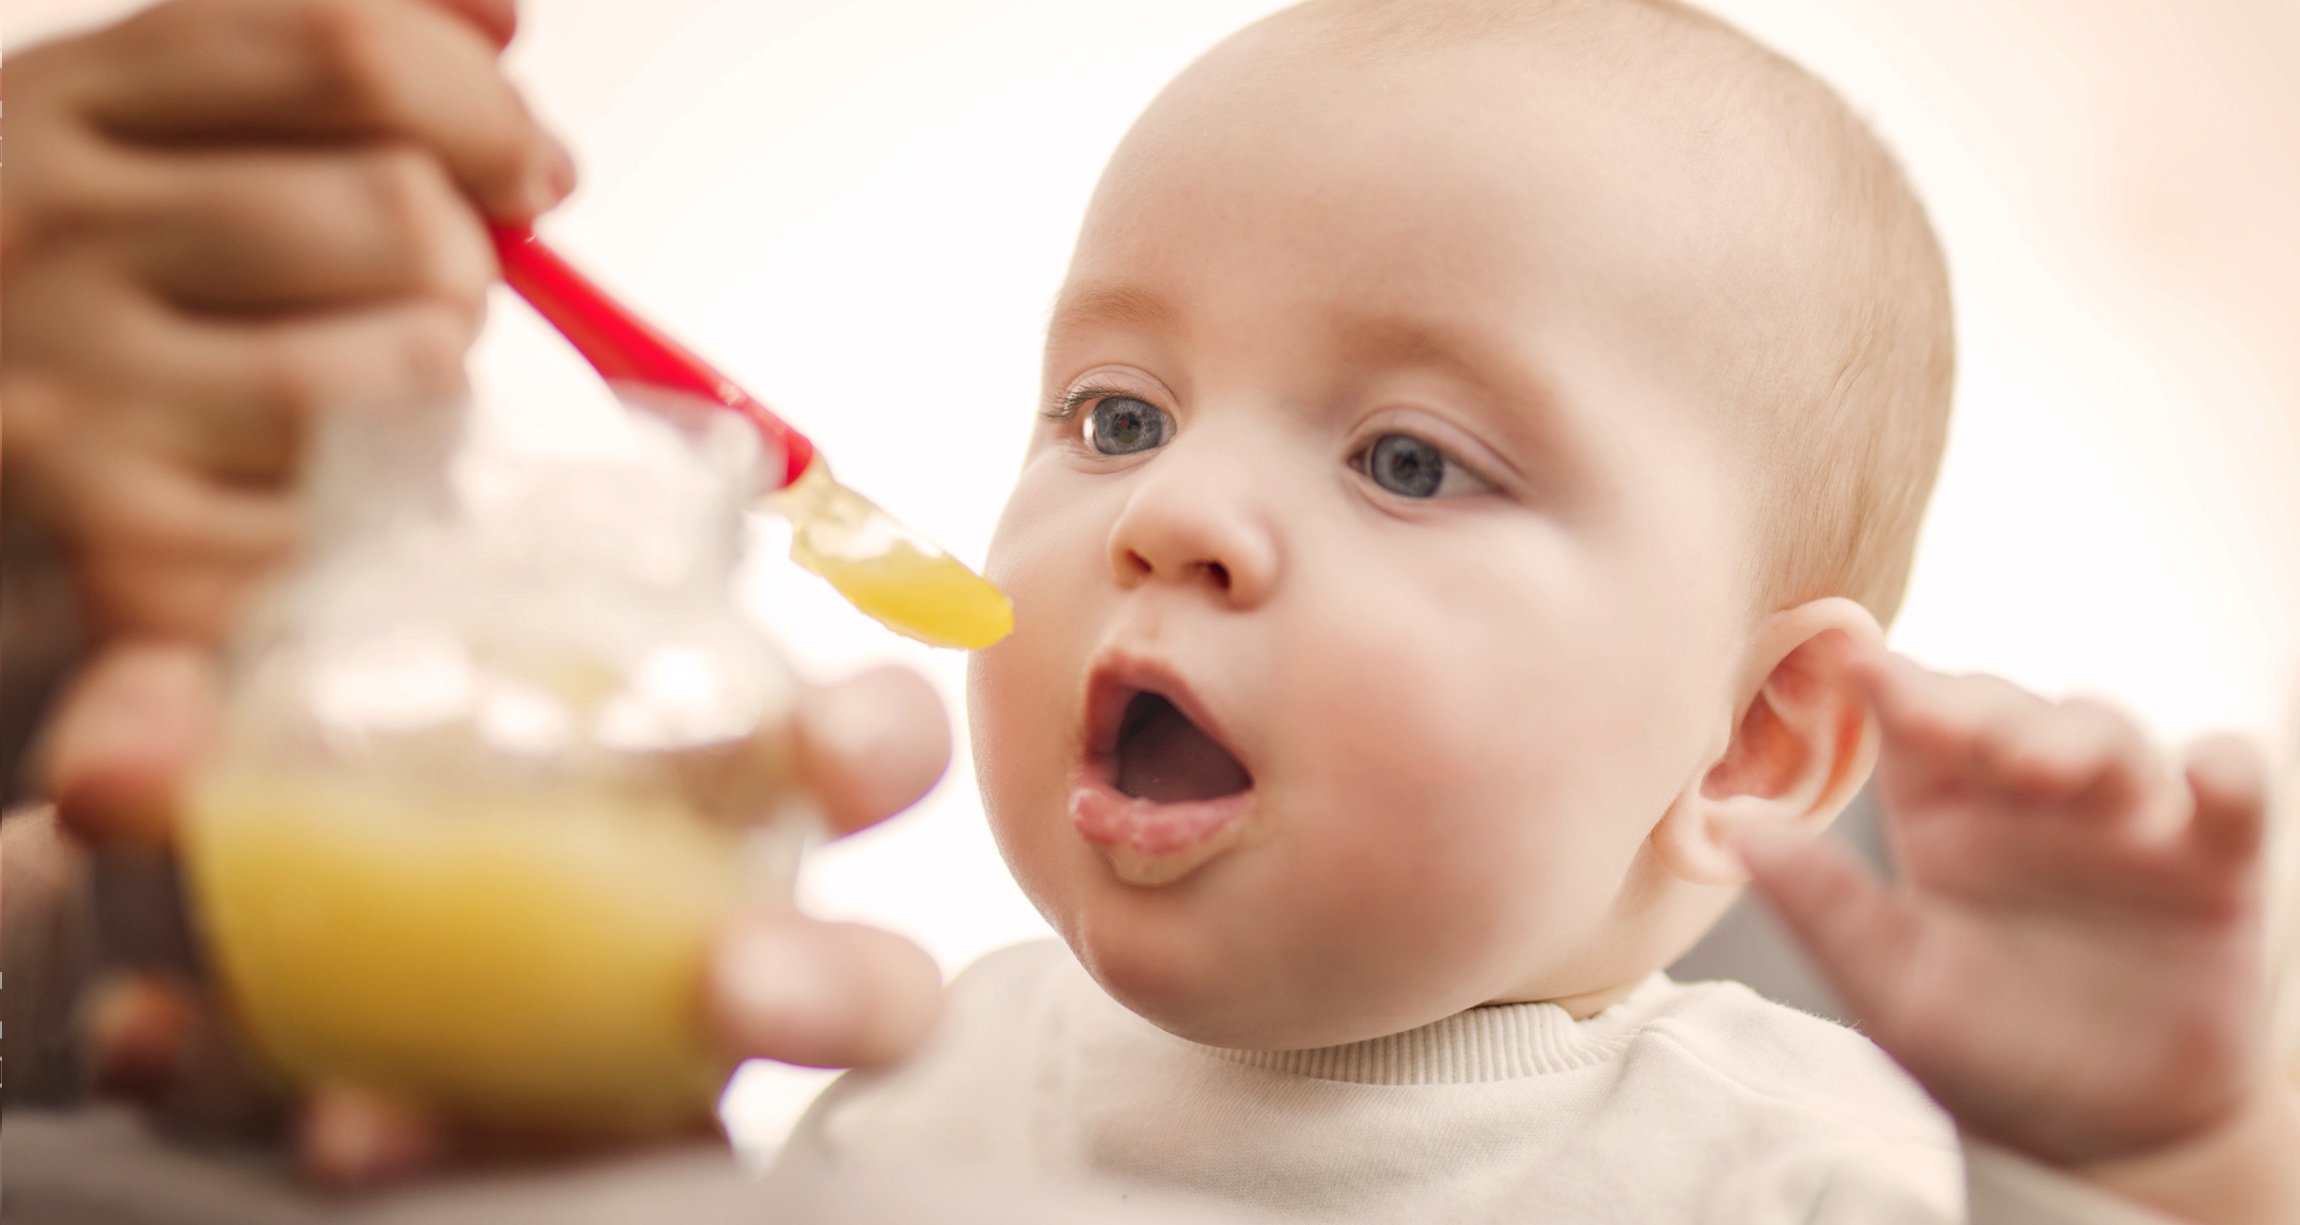 Gerber Baby Food: Are There Pesticides in Gerber Baby Food?